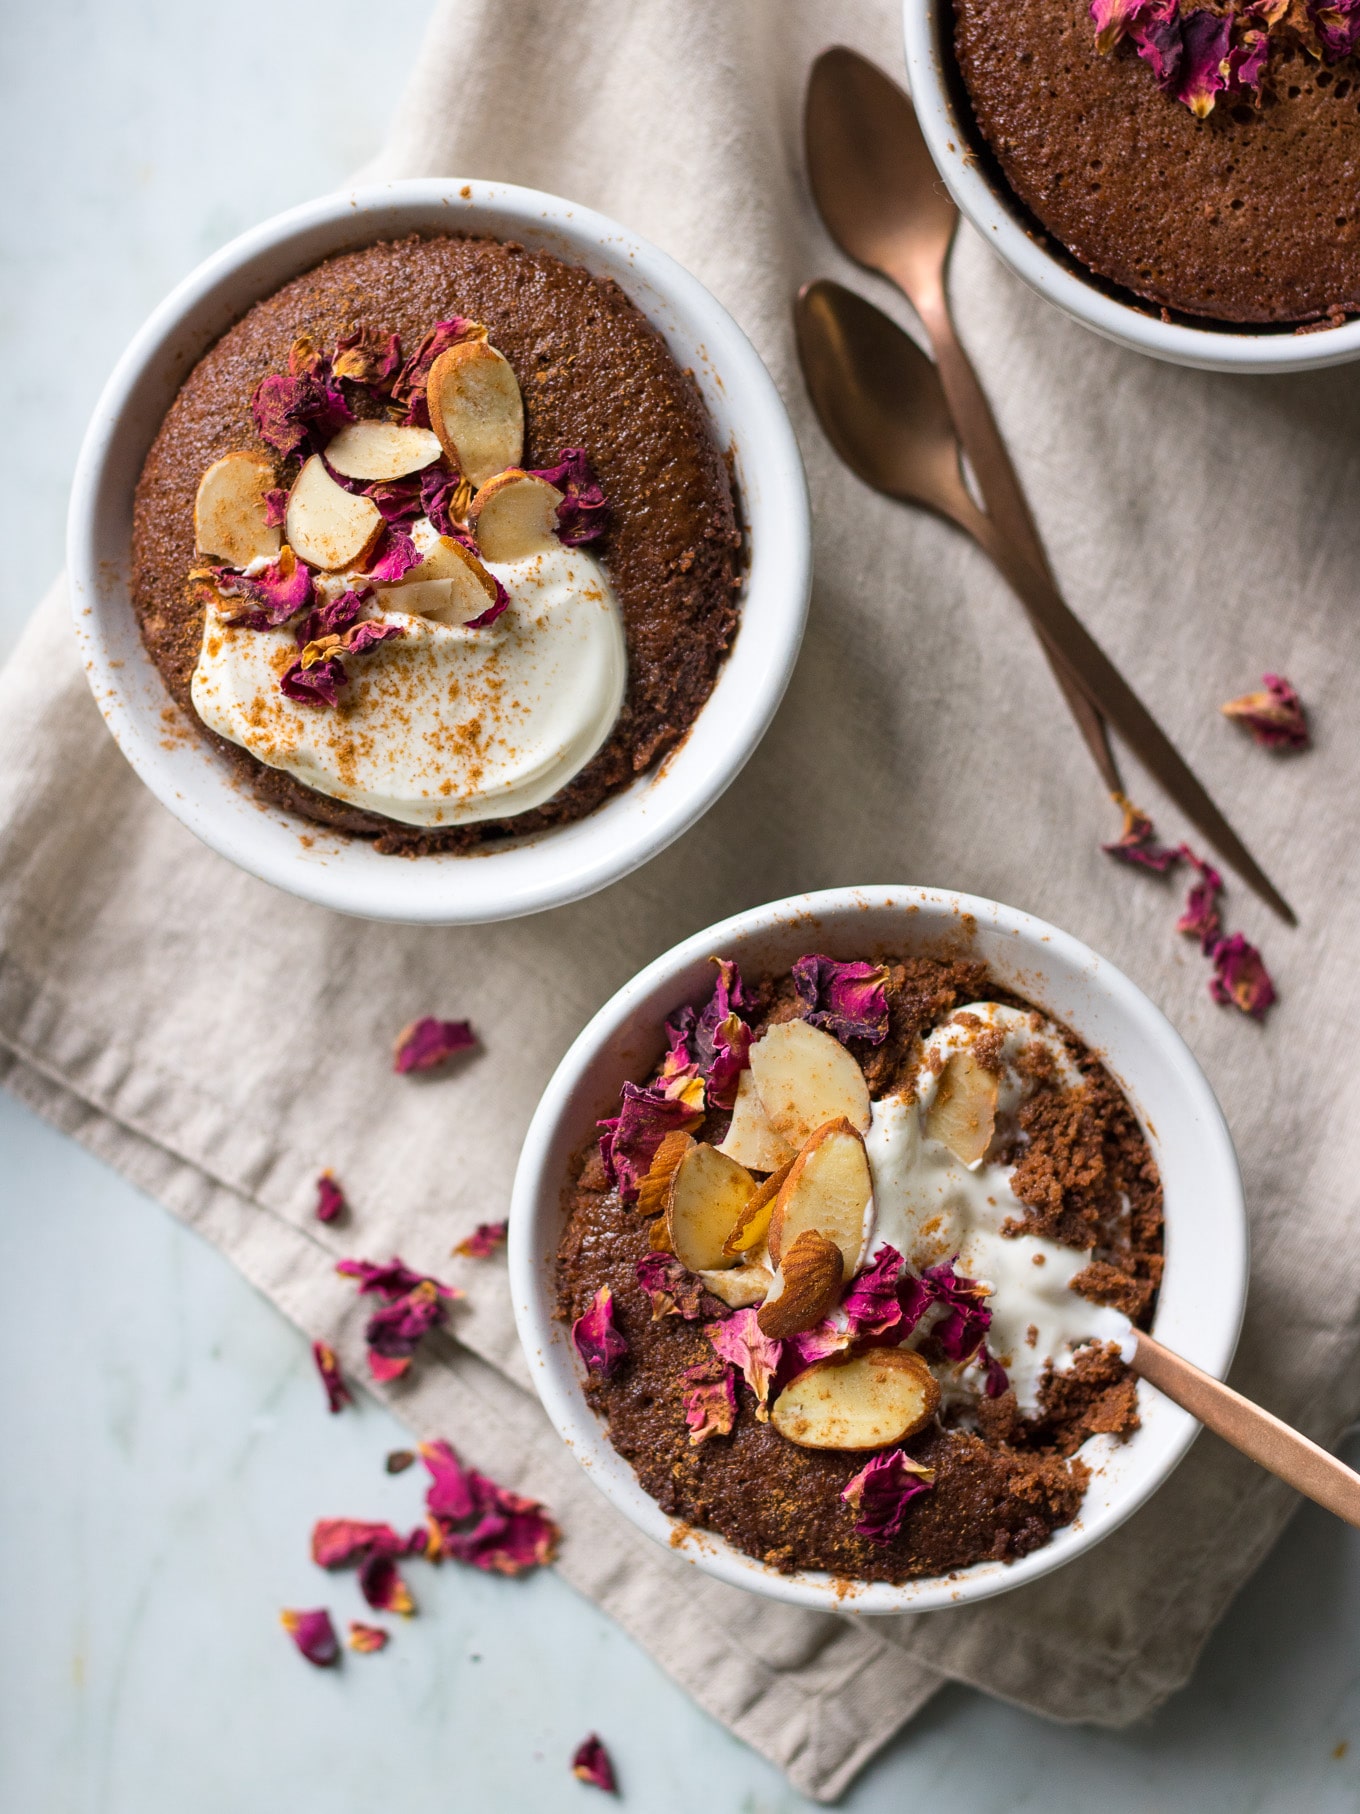 A healthy chocolate cake served in a white ramekin with rose petals, almonds and yoghurt